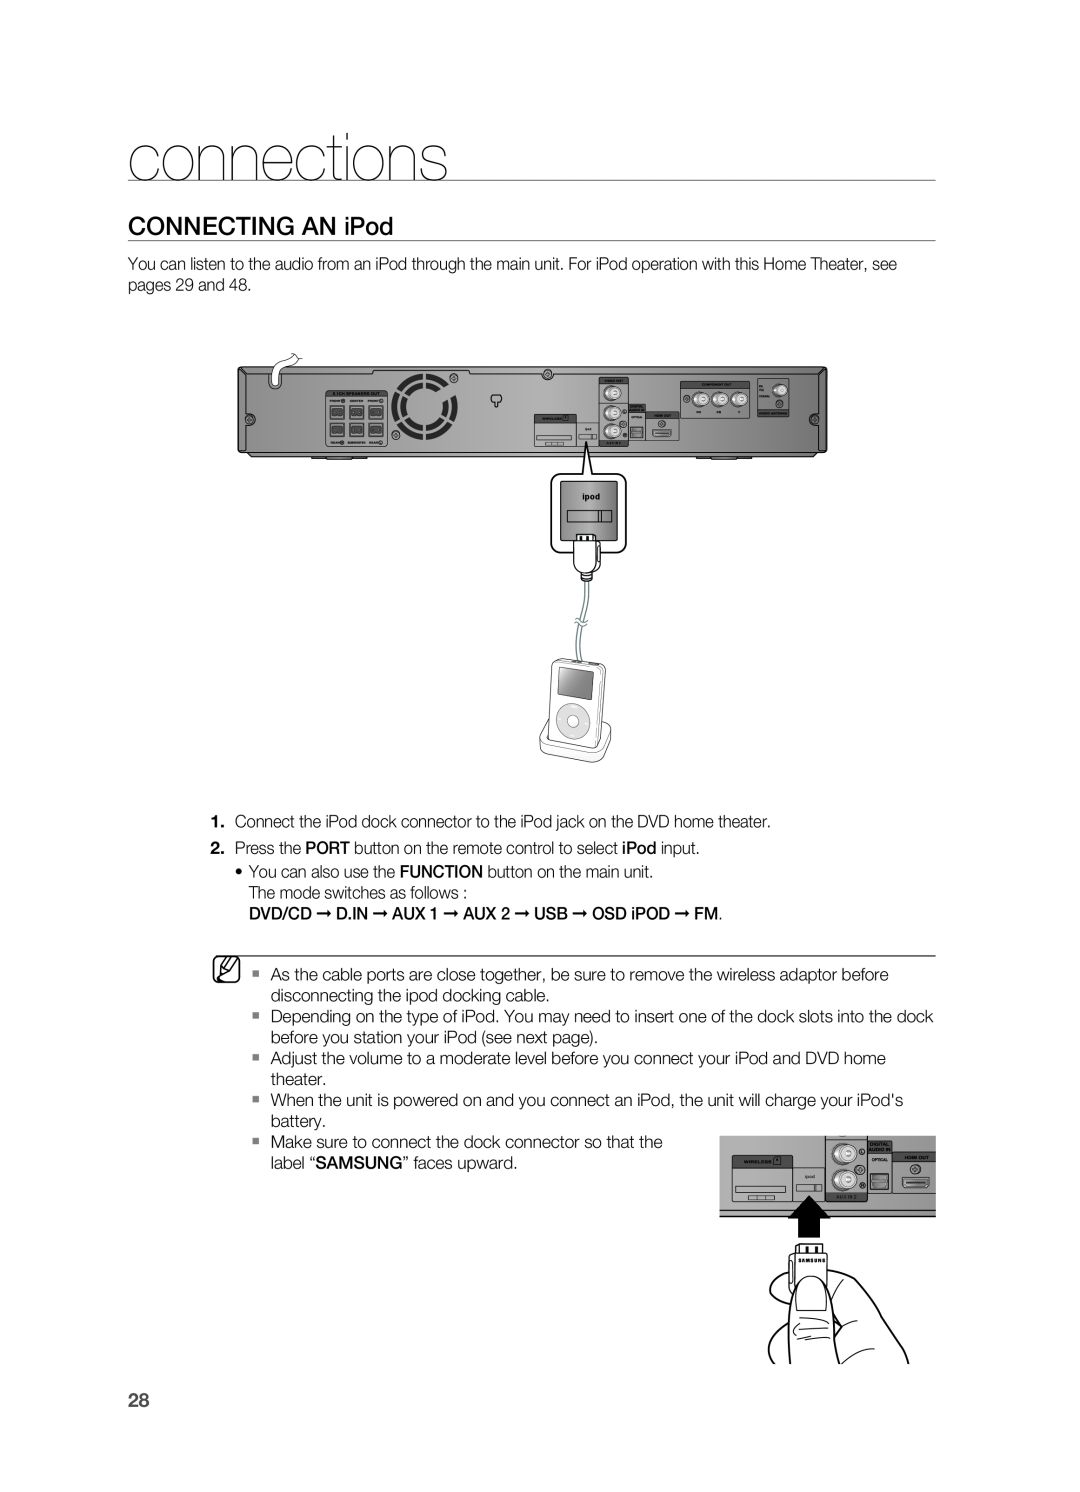 Samsung AH68-02055S manual Connecting an iPod, connections 